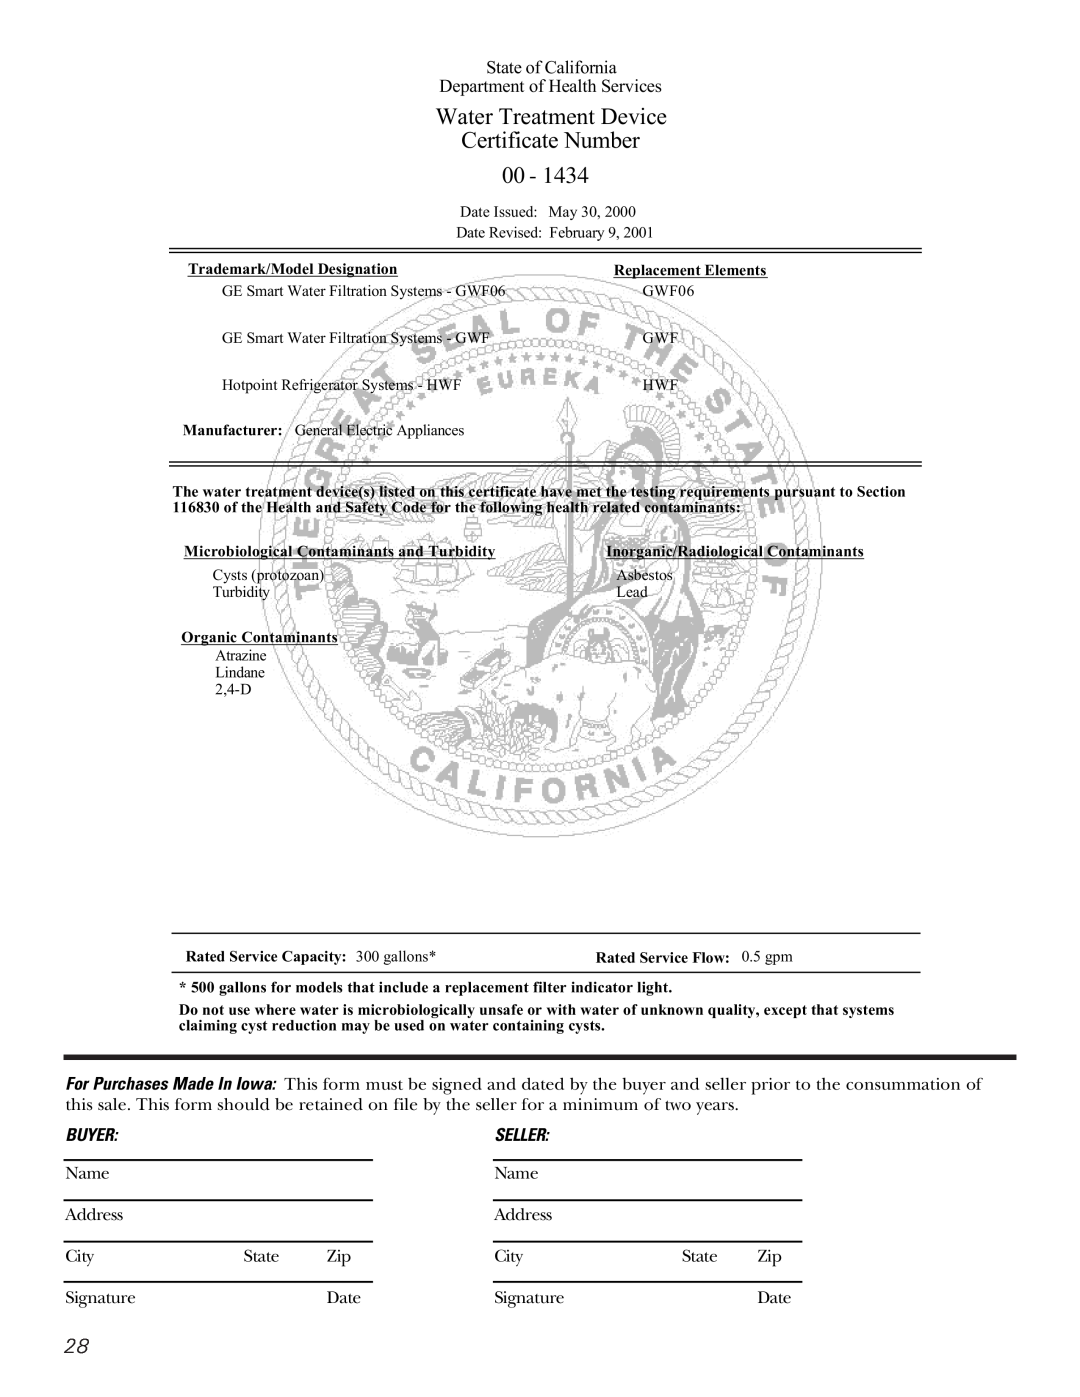 GE 197D3351P003 Water Treatment Device Certificate Number, State of California Department of Health Services 